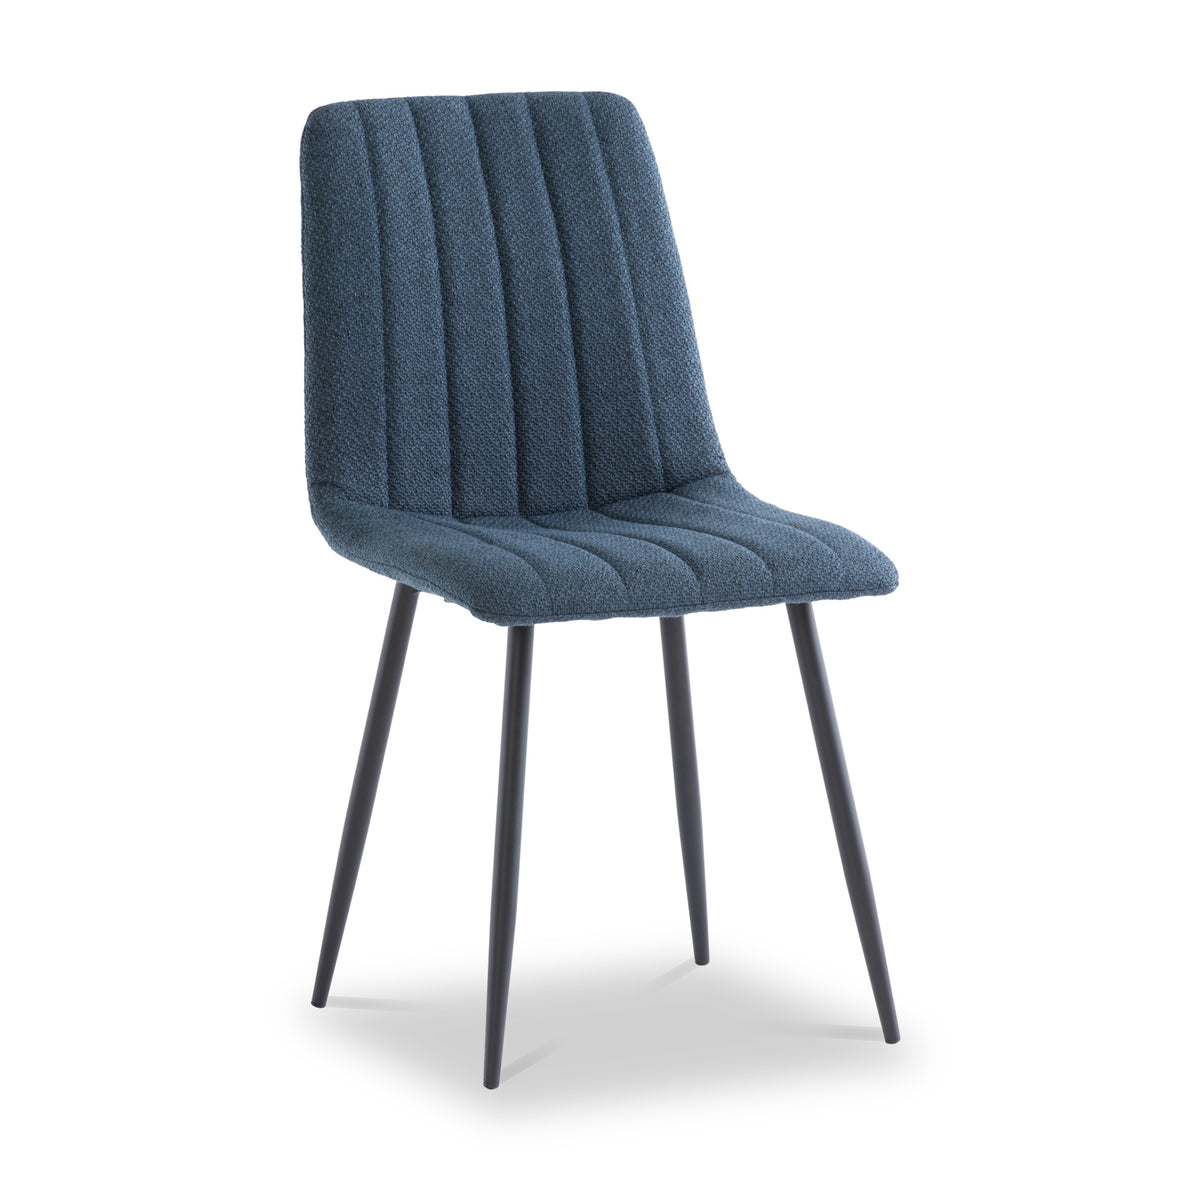 Harmon Blue Fabric Dining Chair from Roseland Furniture